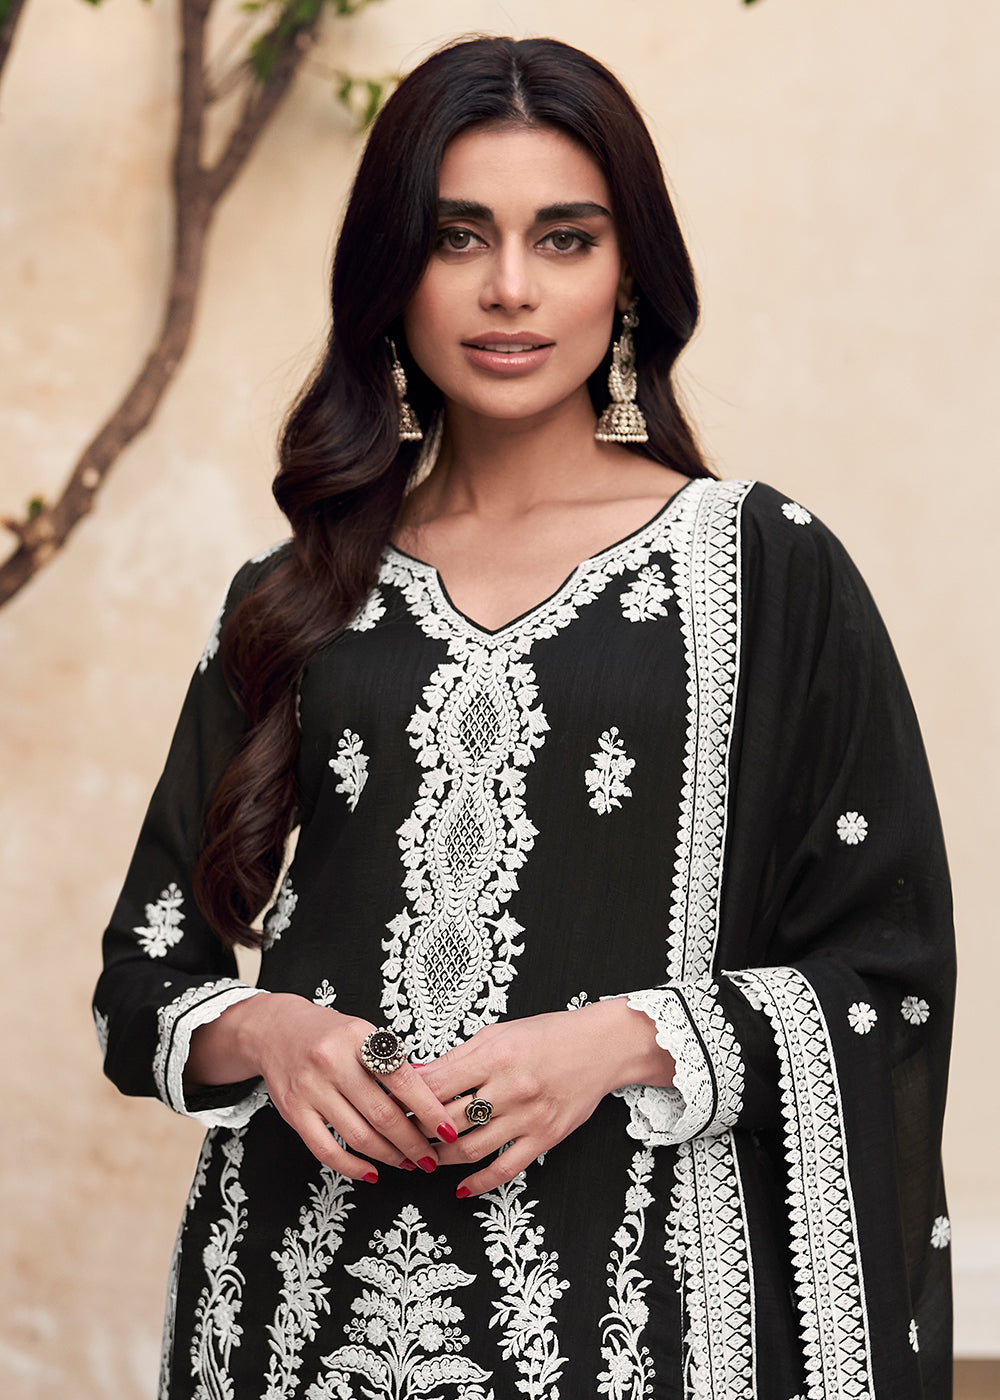 Buy Now Beautiful Black Festive Embroidered Palazzo Salwar Suit Online in USA, UK, Canada, Germany, Australia & Worldwide at Empress Clothing